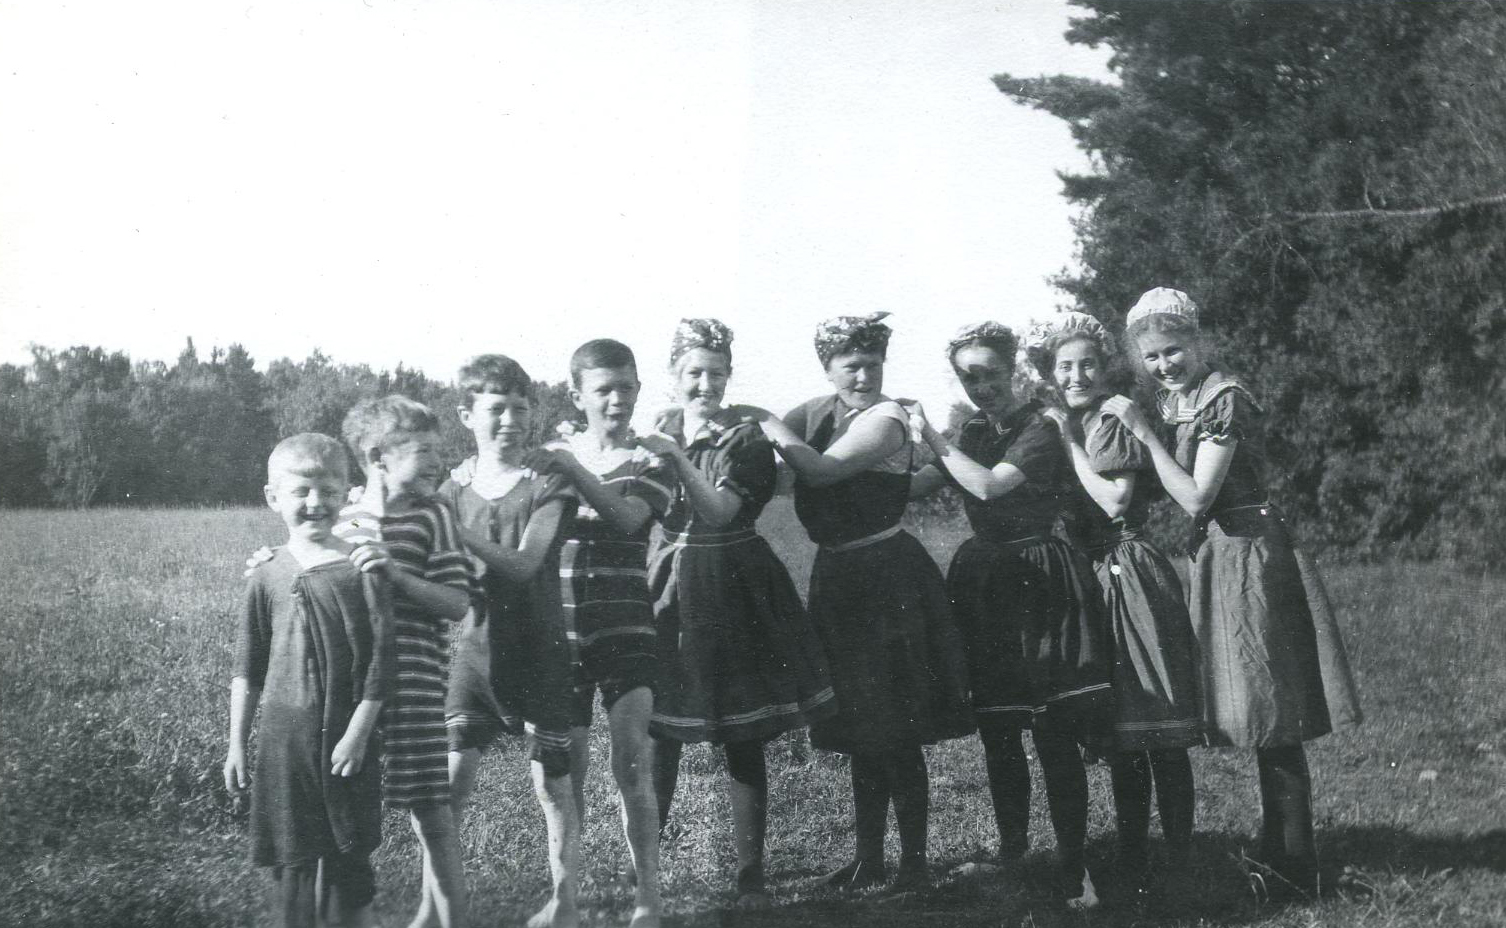 Nine children standing on grass beside each other wearing their bathing suits.